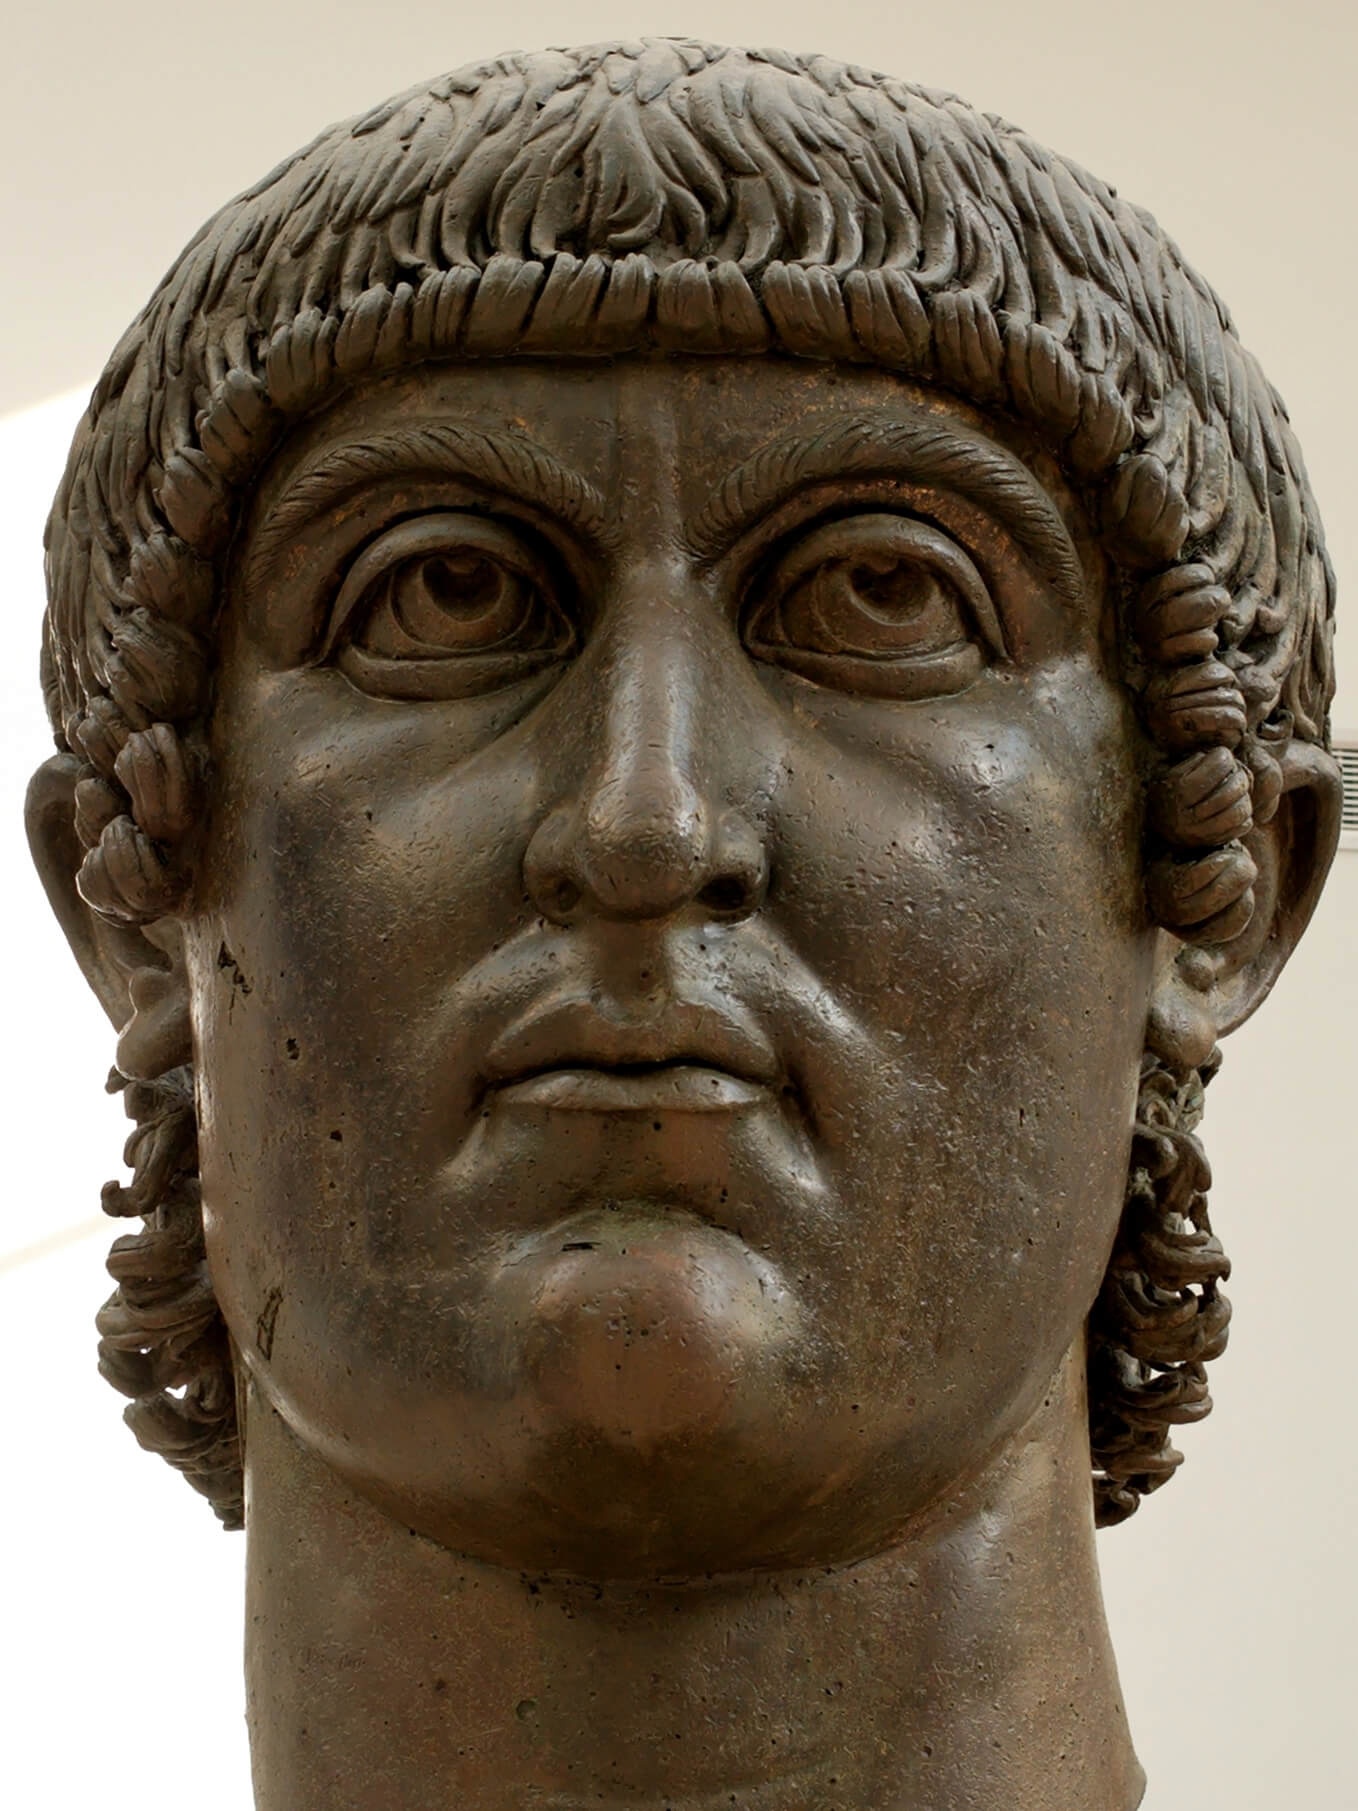 Photo of the head of a bronze colossal statue of Emperor Constantine I from the 4th century AD.